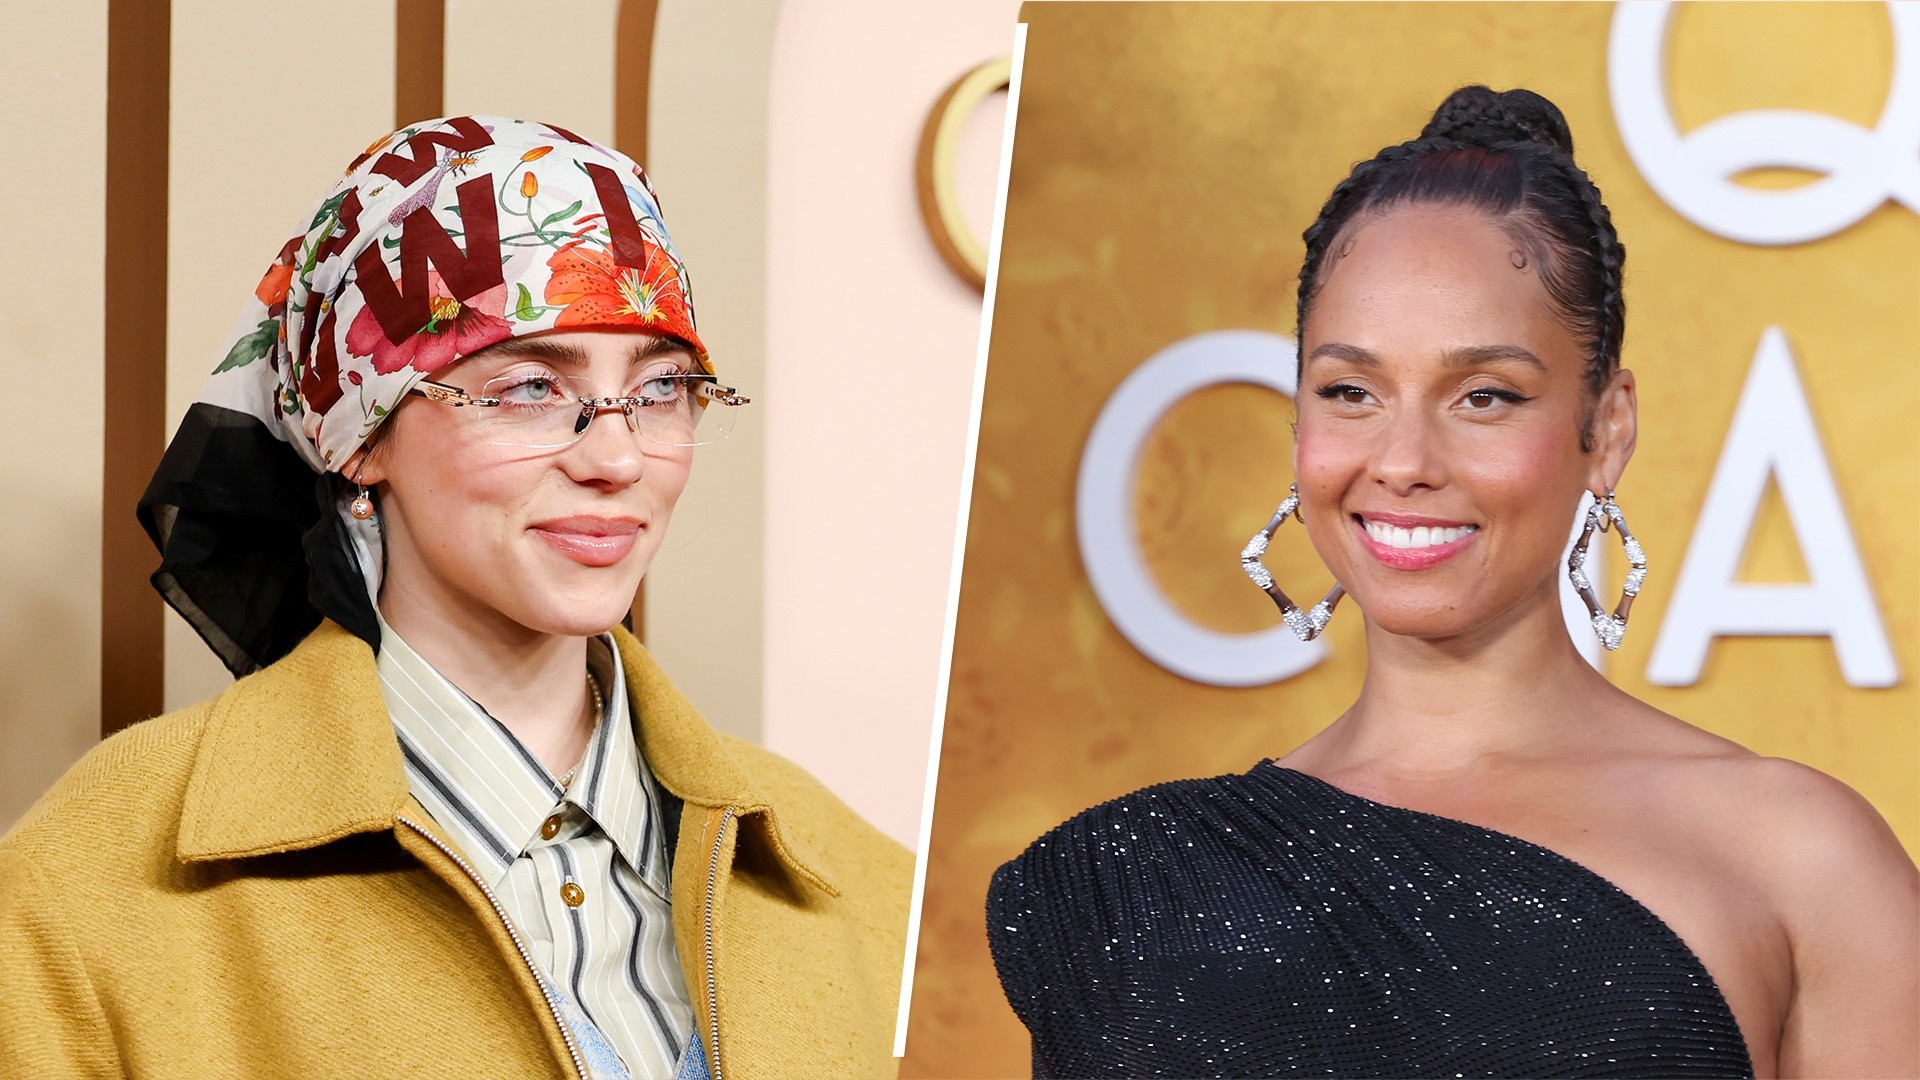 Alicia Keys' son asks Billie Eilish to be friends — and she responds!